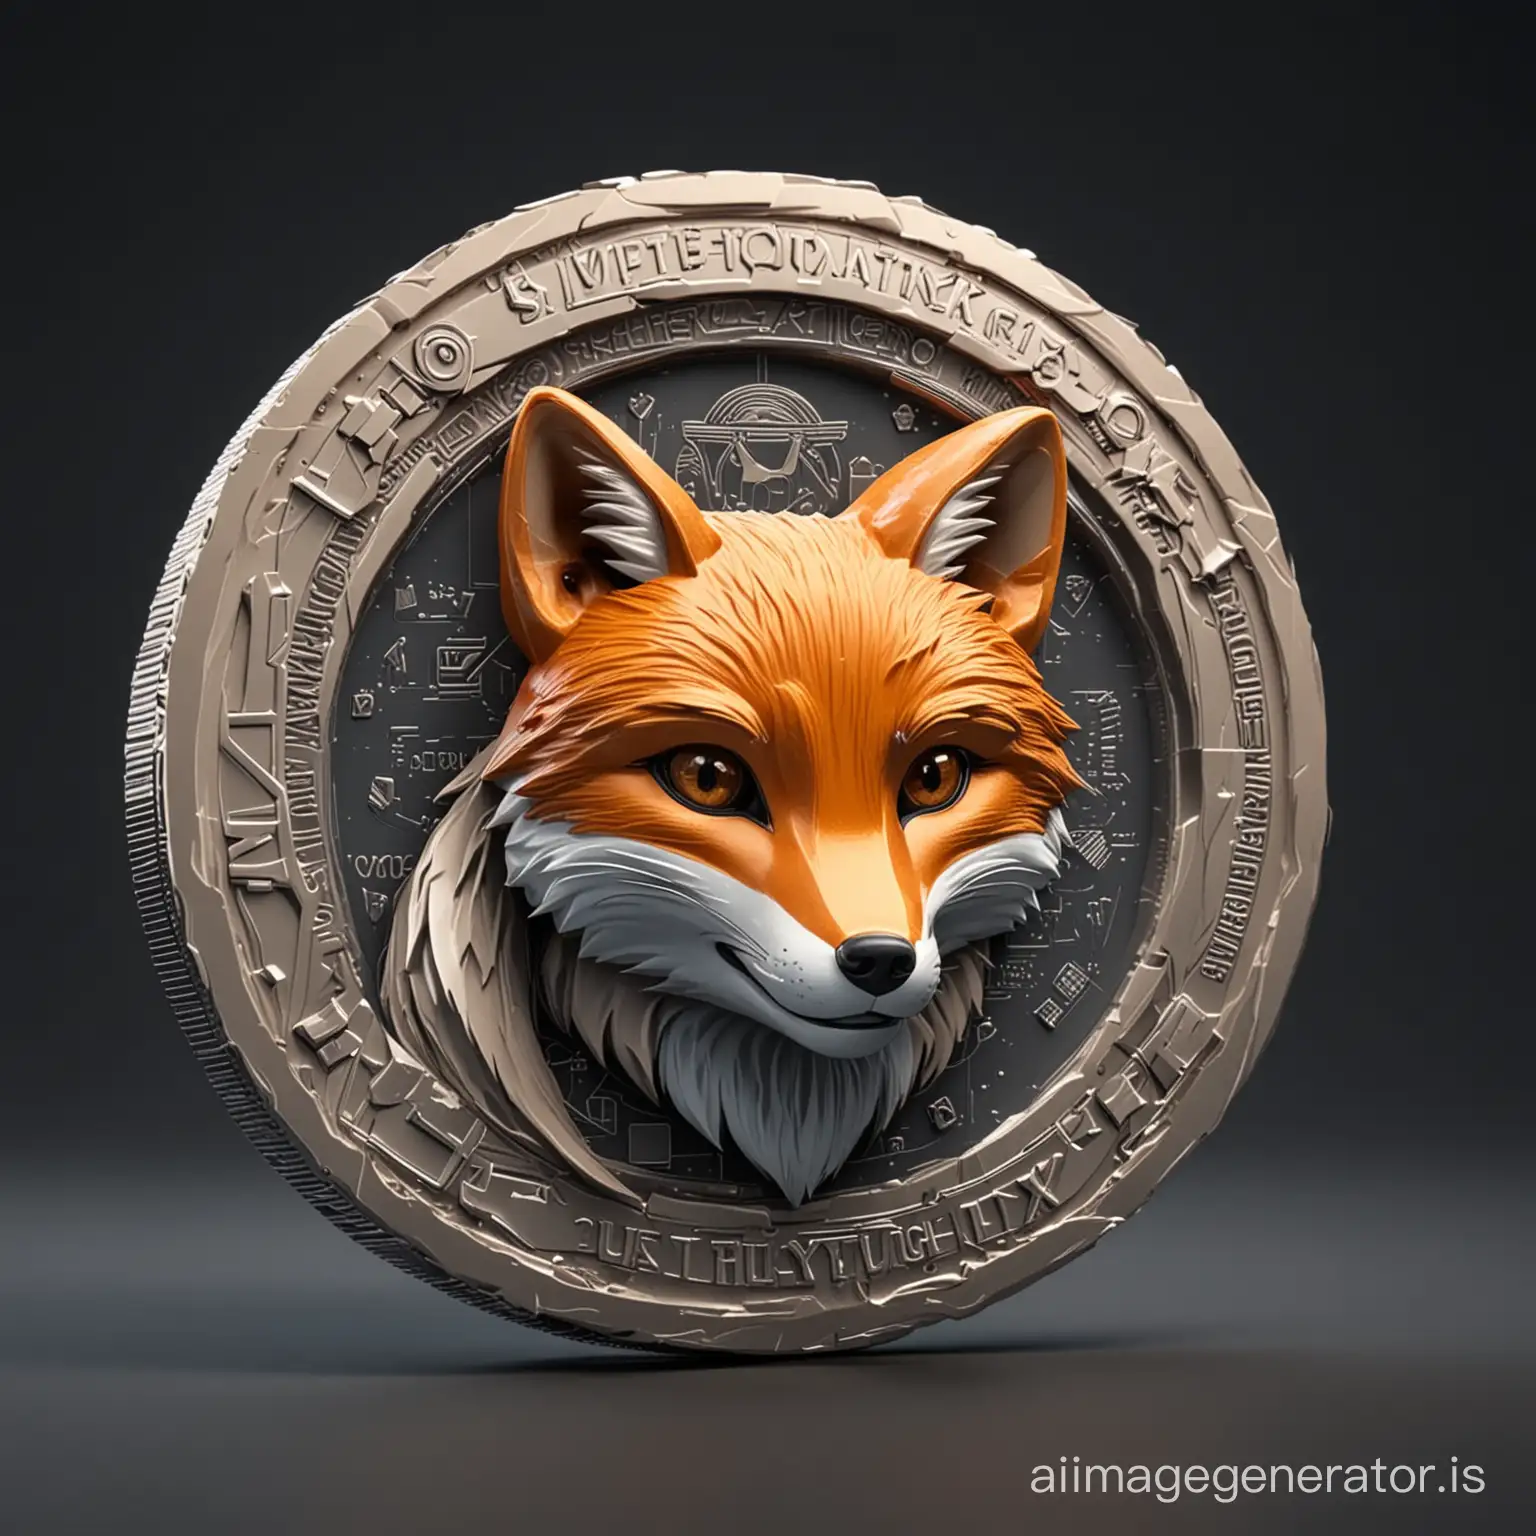 futuristic fox logo in coin style 3D without background,
fox is the crypto currency, high quality, 4k, realistic, details, futuristic, coin should write 'ESTABLISHED 2024 - GREECE MAKEDONIA'